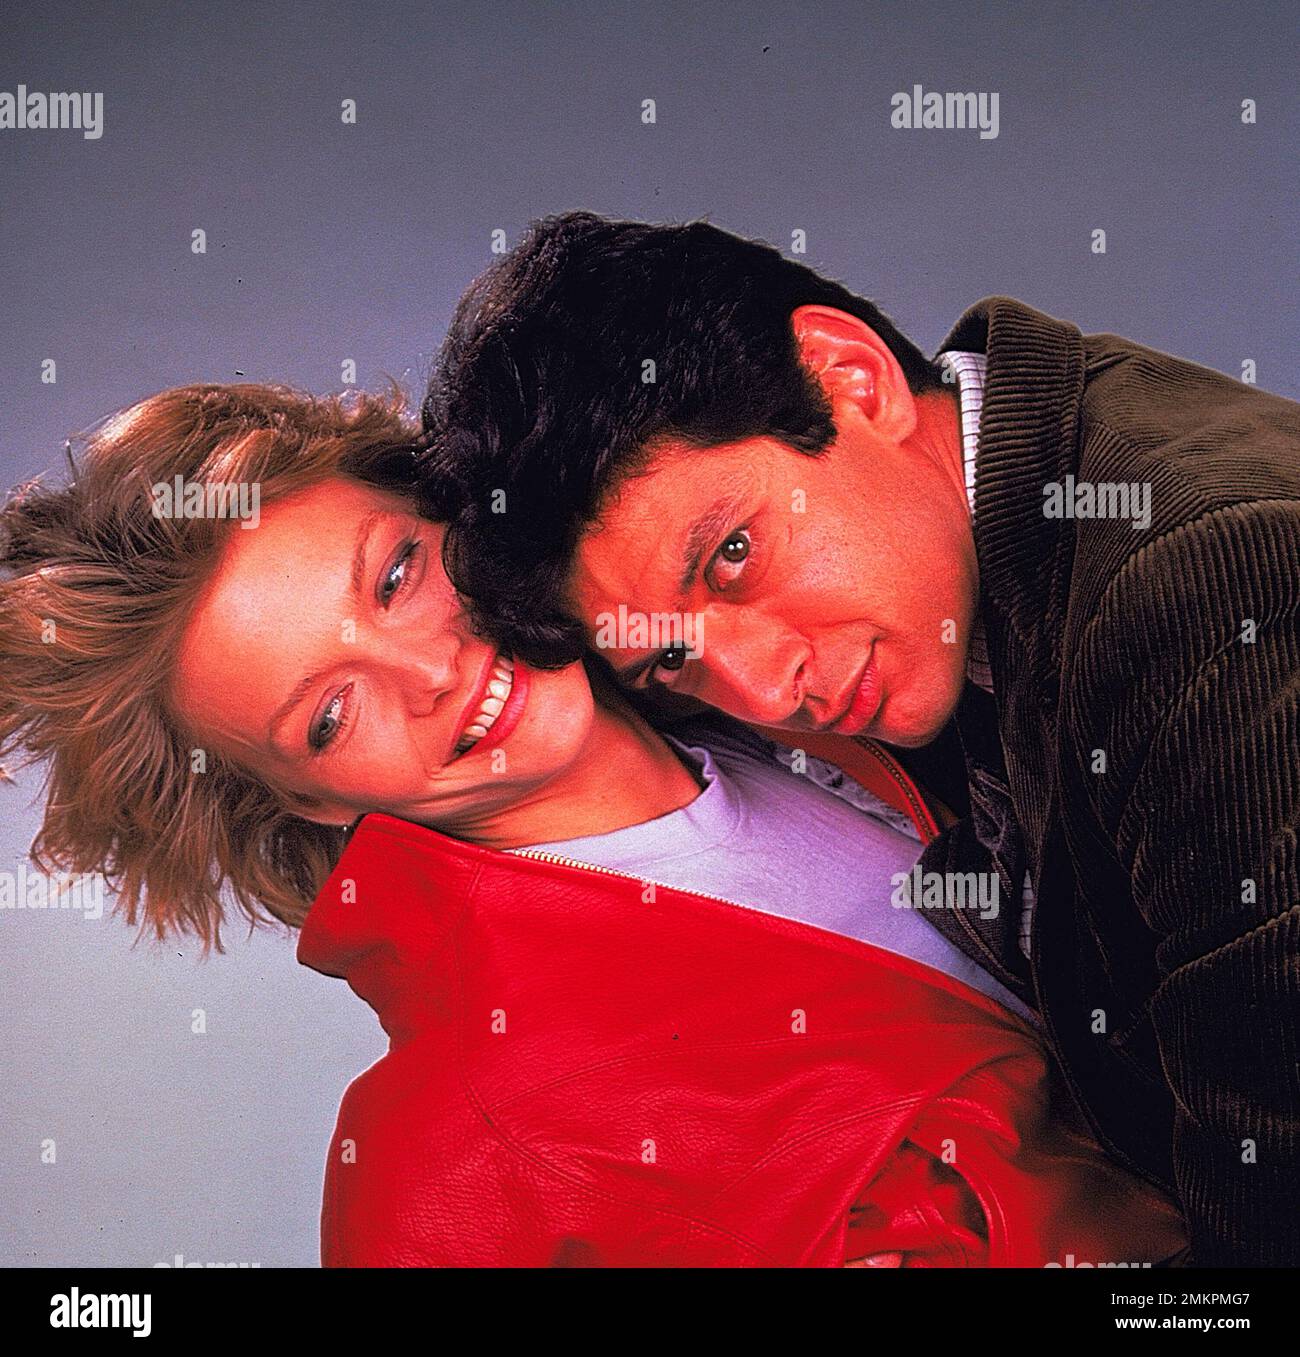 MICHELLE PFEIFFER and JEFF GOLDBLUM in INTO THE NIGHT (1985). Credit: UNIVERSAL PICTURES / Album Stock Photo